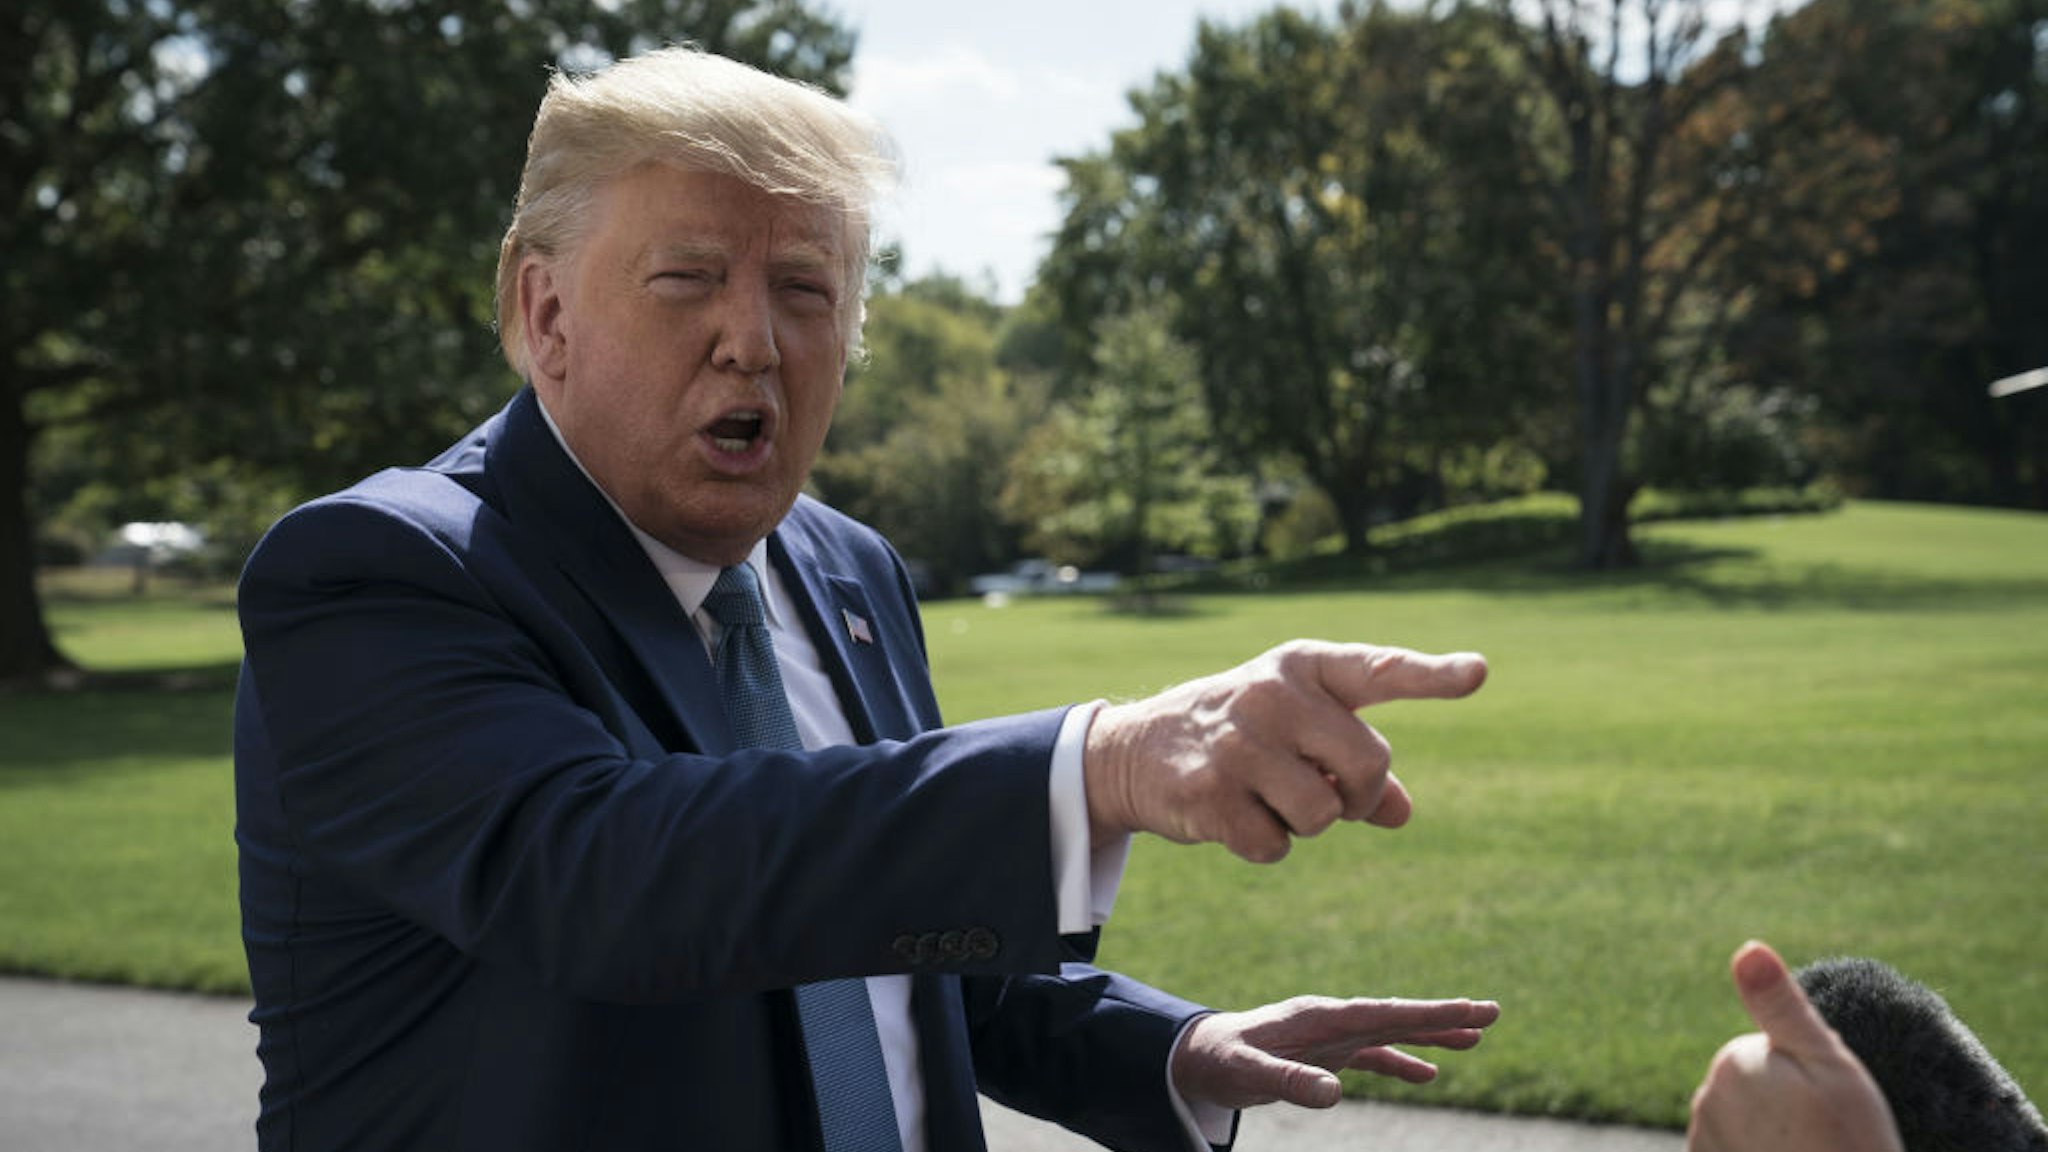 President Donald Trump speaks to members of the media outside of the White House in Washington, D.C., U.S., on Friday, Oct. 4, 2019.